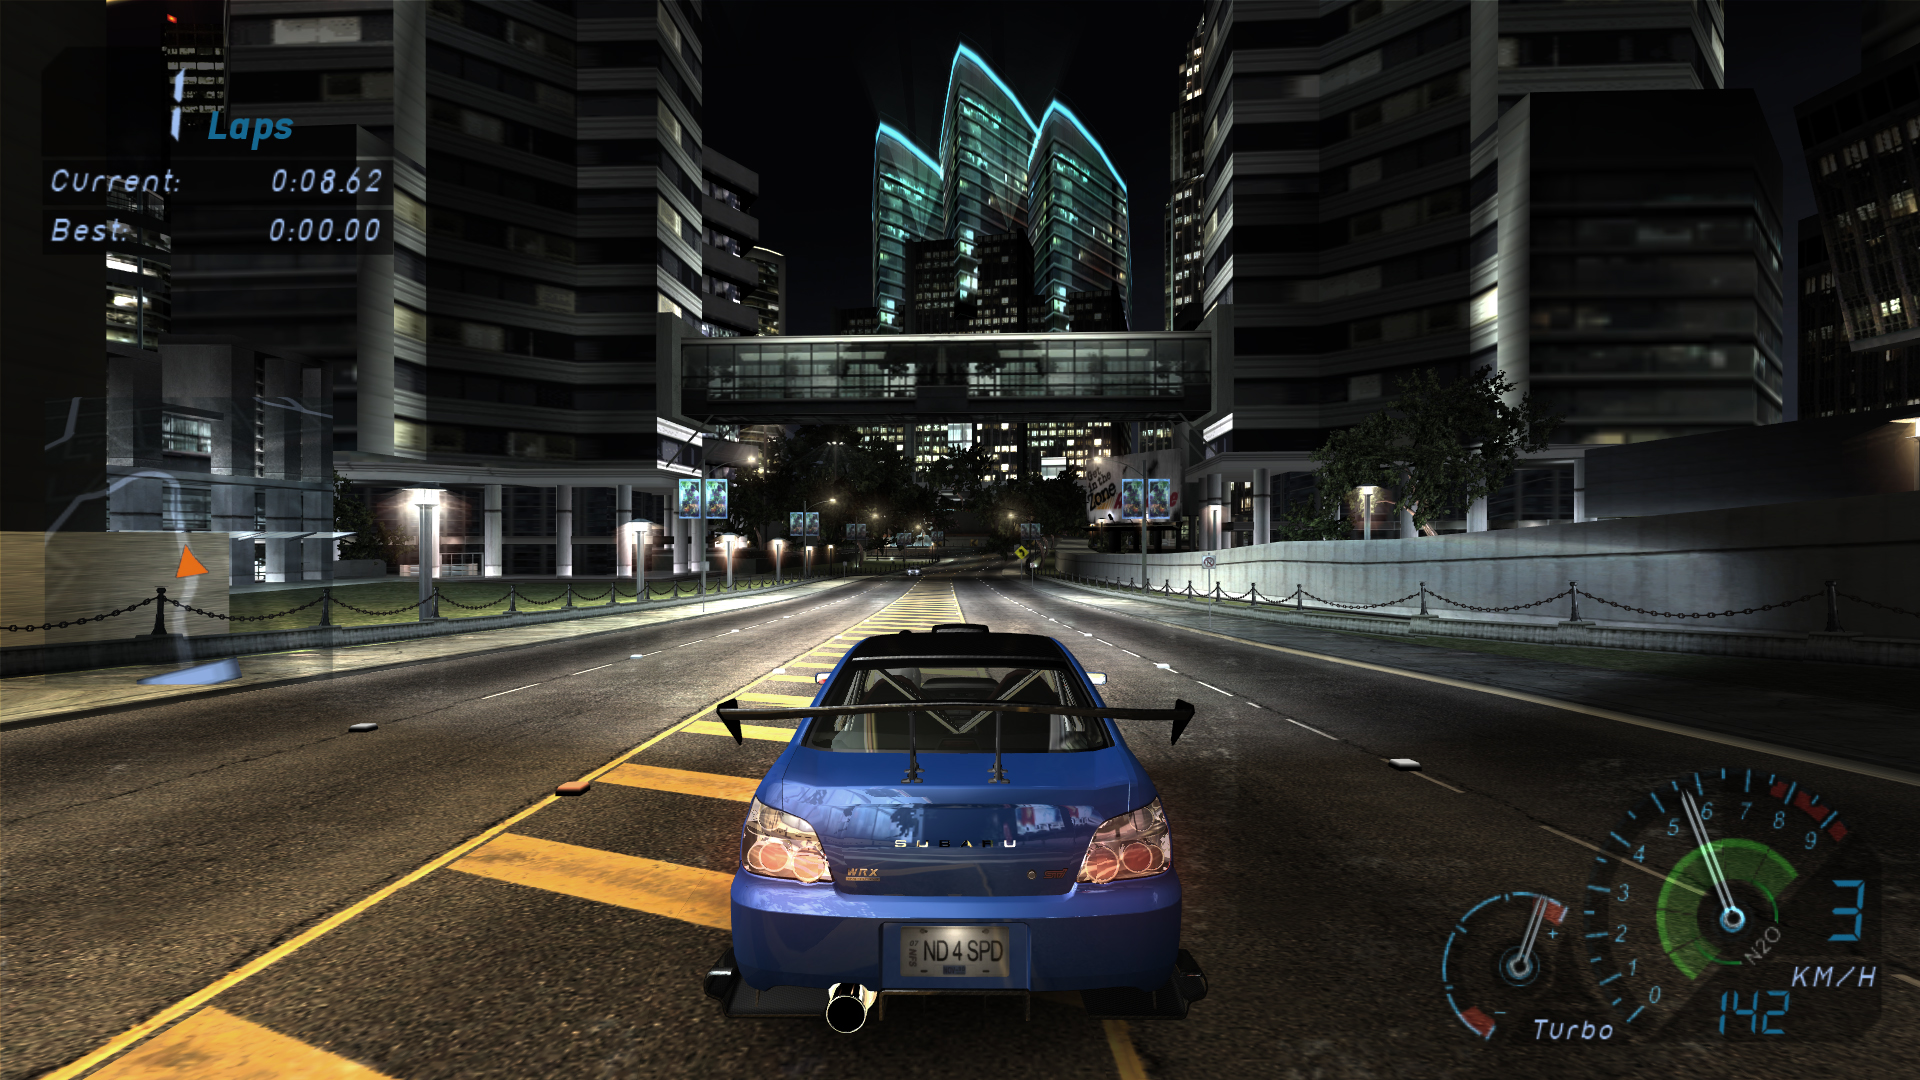 Image 21 - mSE (m2011 v2.0) mod for Need For Speed: Undergro